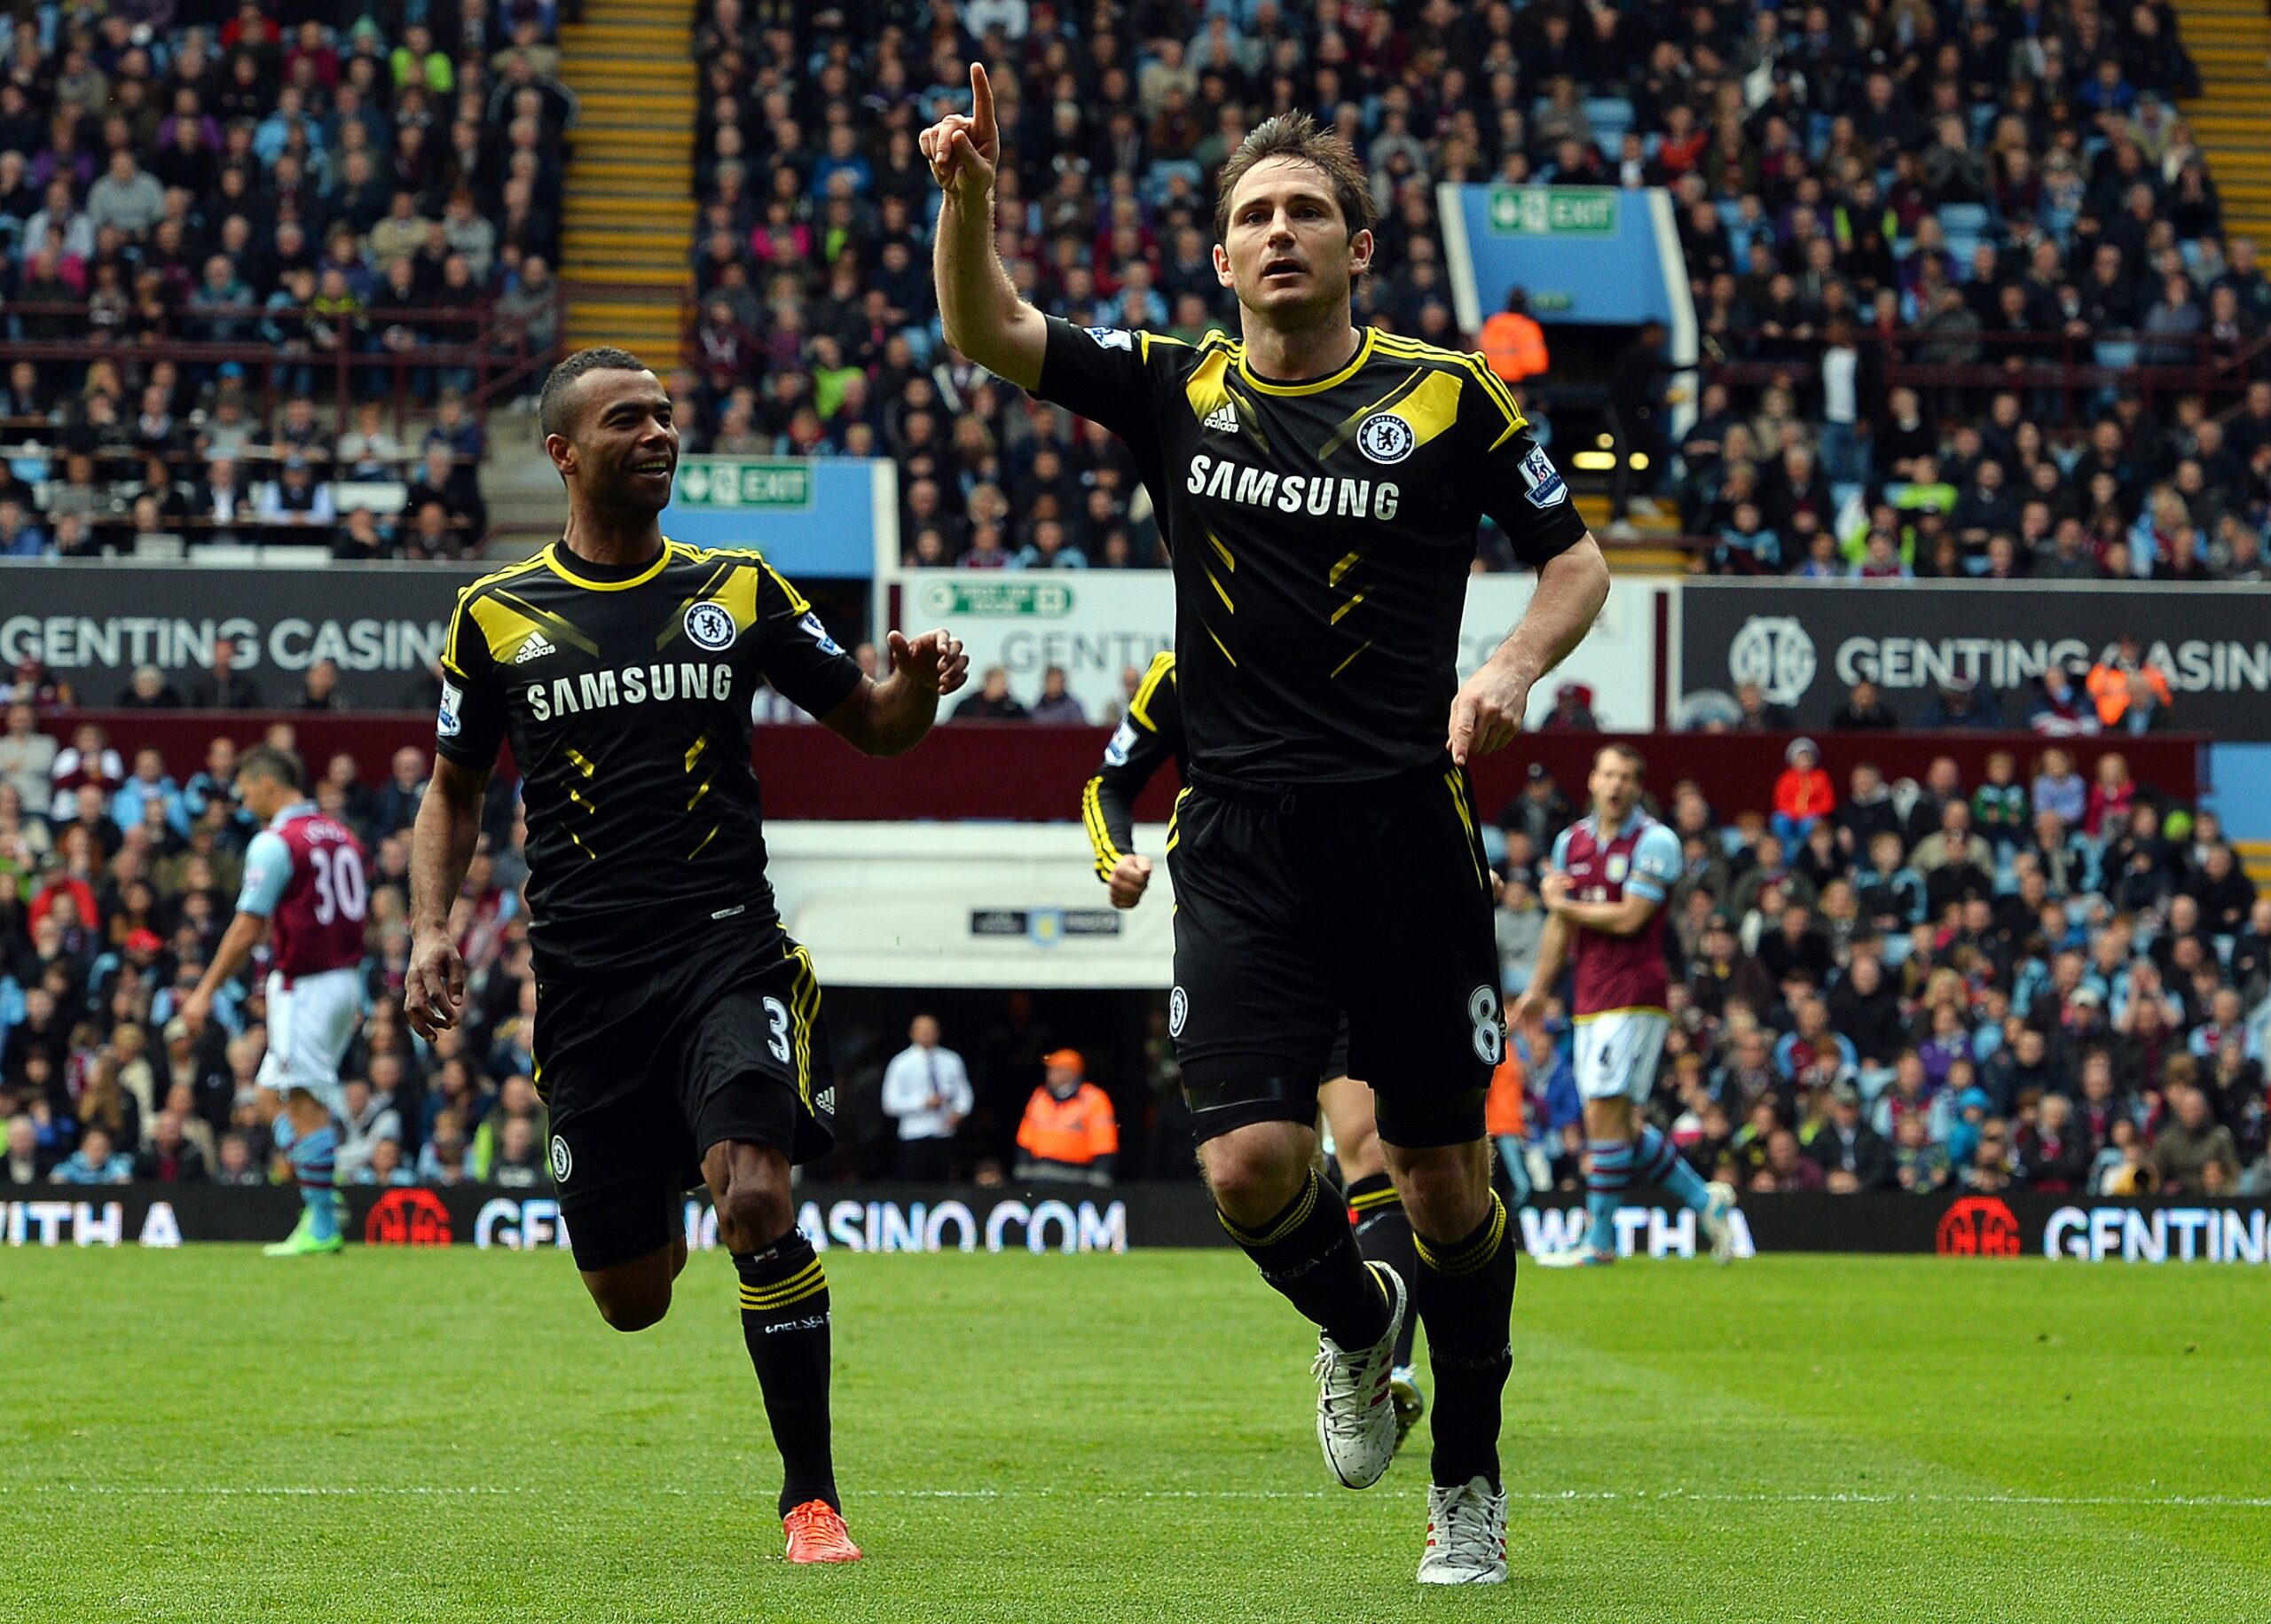 frank-lampard-the-all-time-top-goal-scorer-for-chelsea-fc